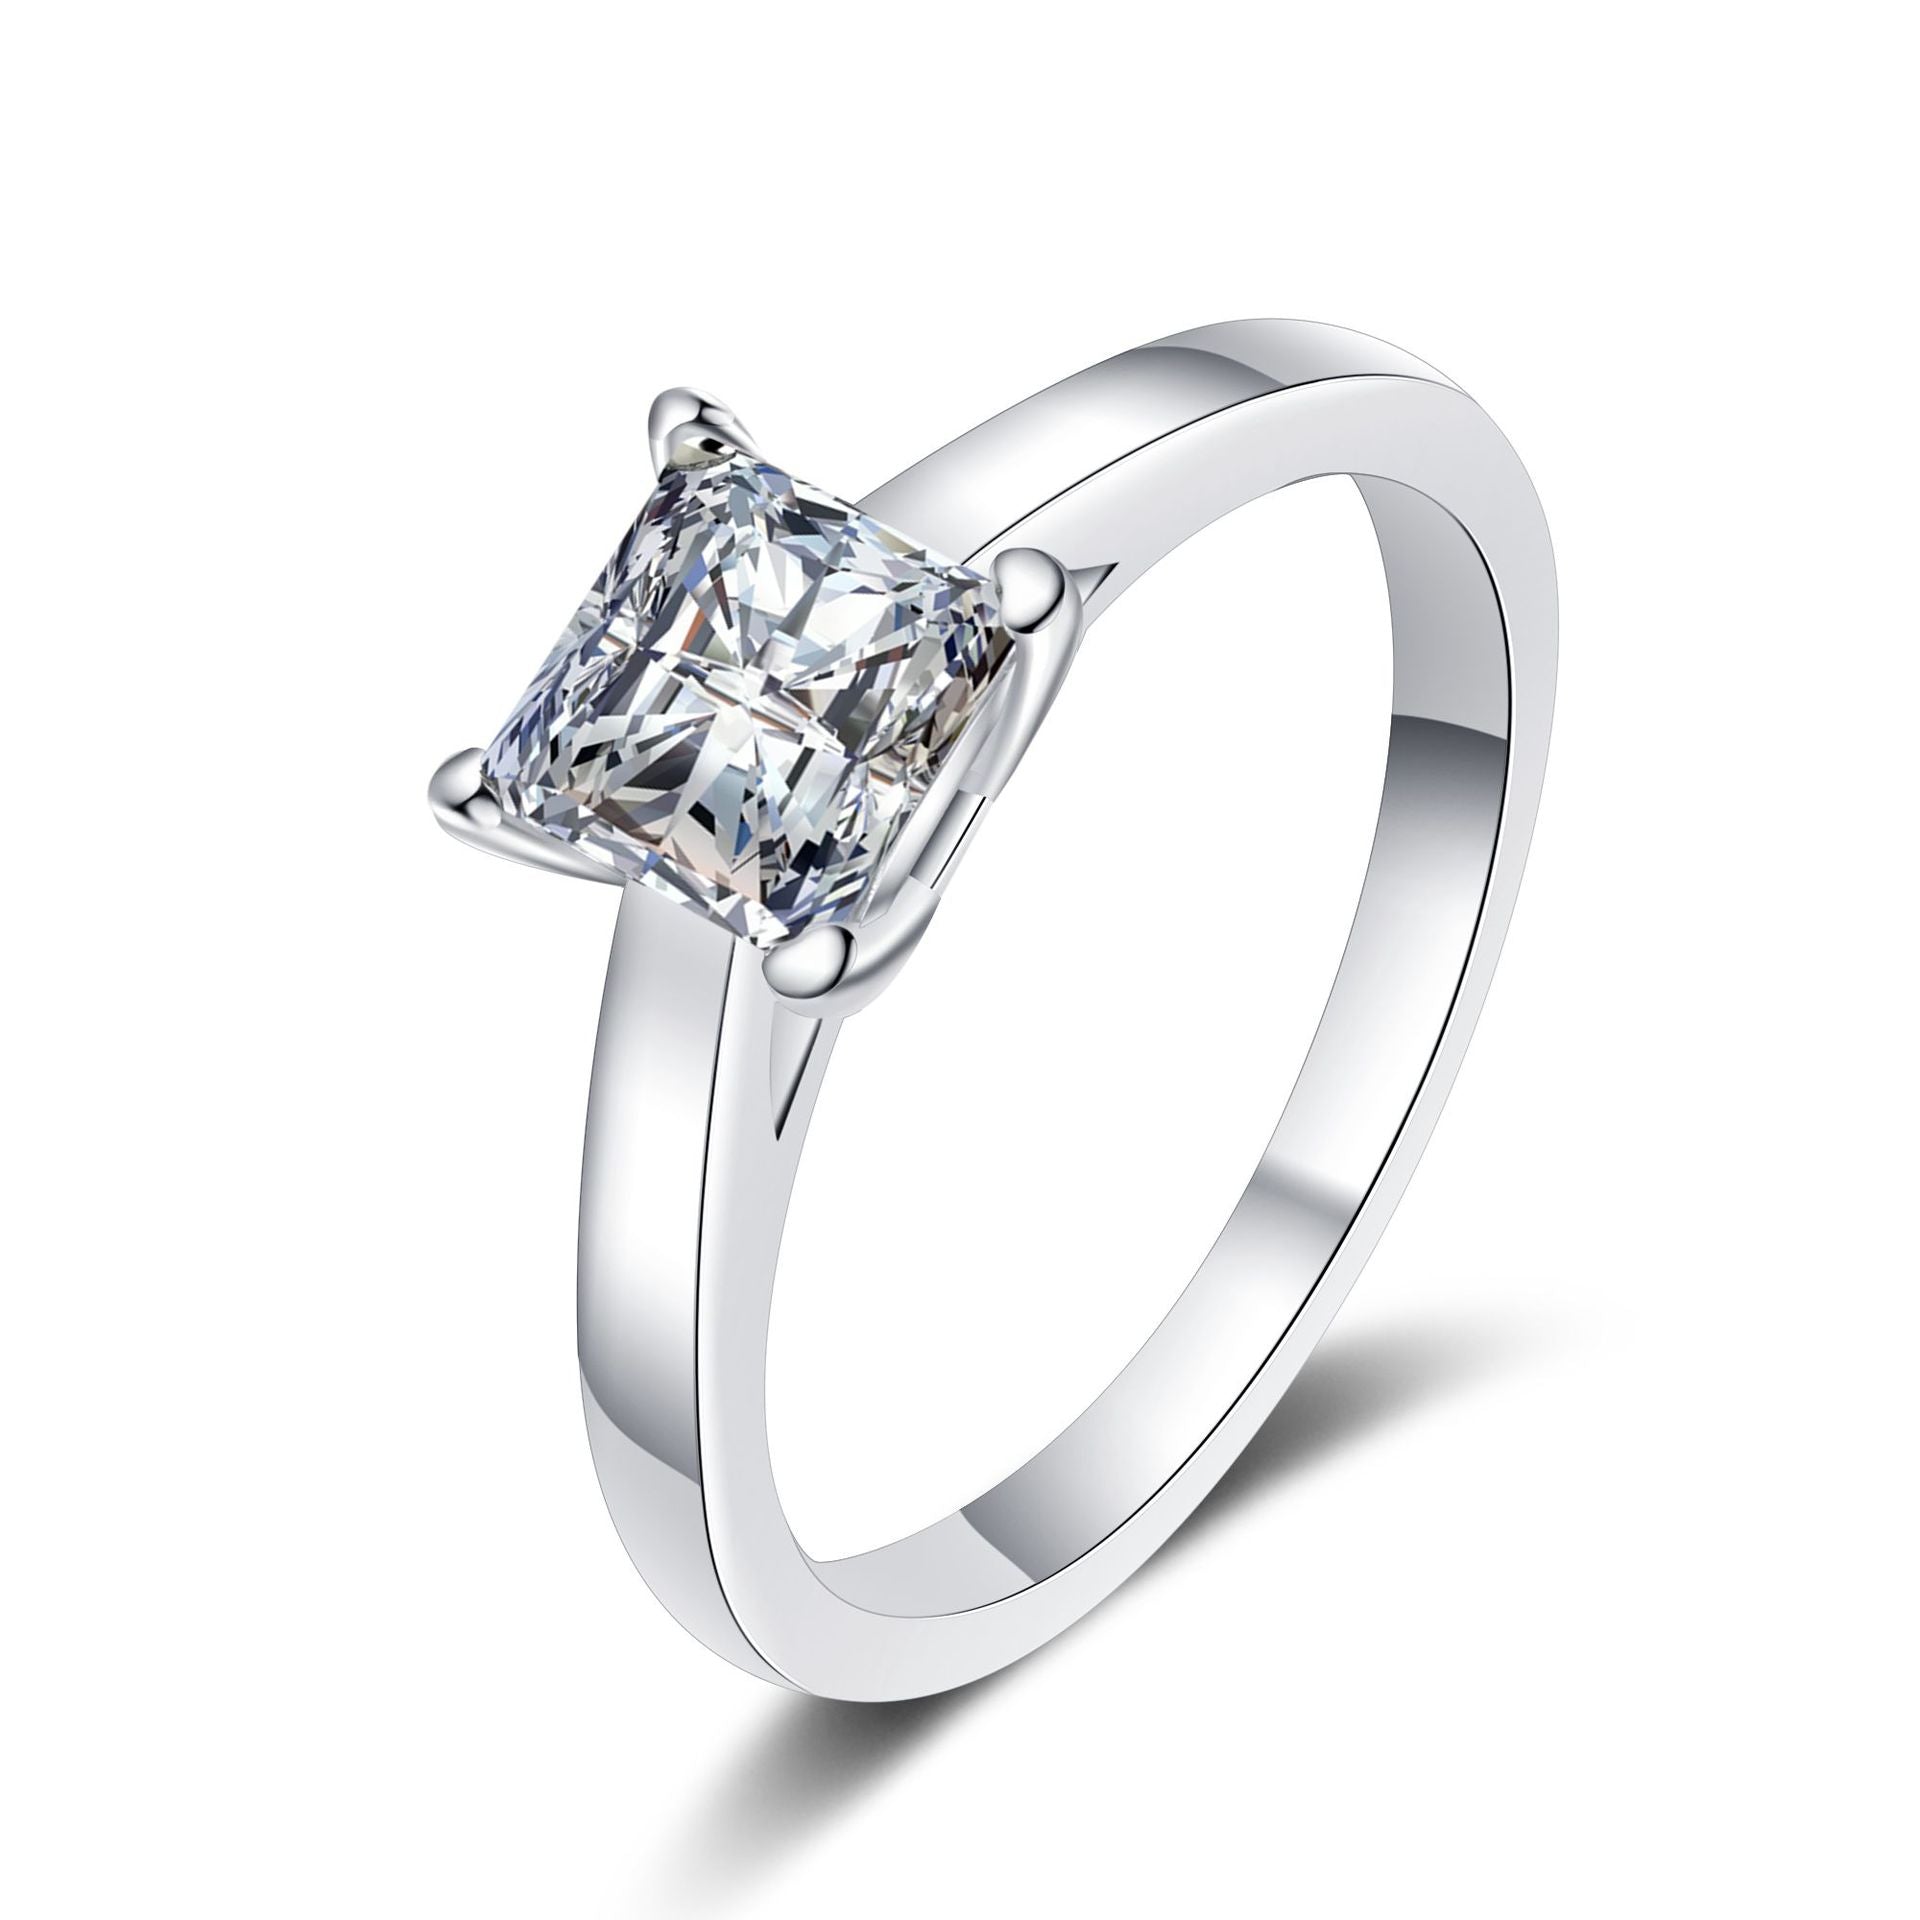 2 ct Moissanite Engagement Ring - HERS